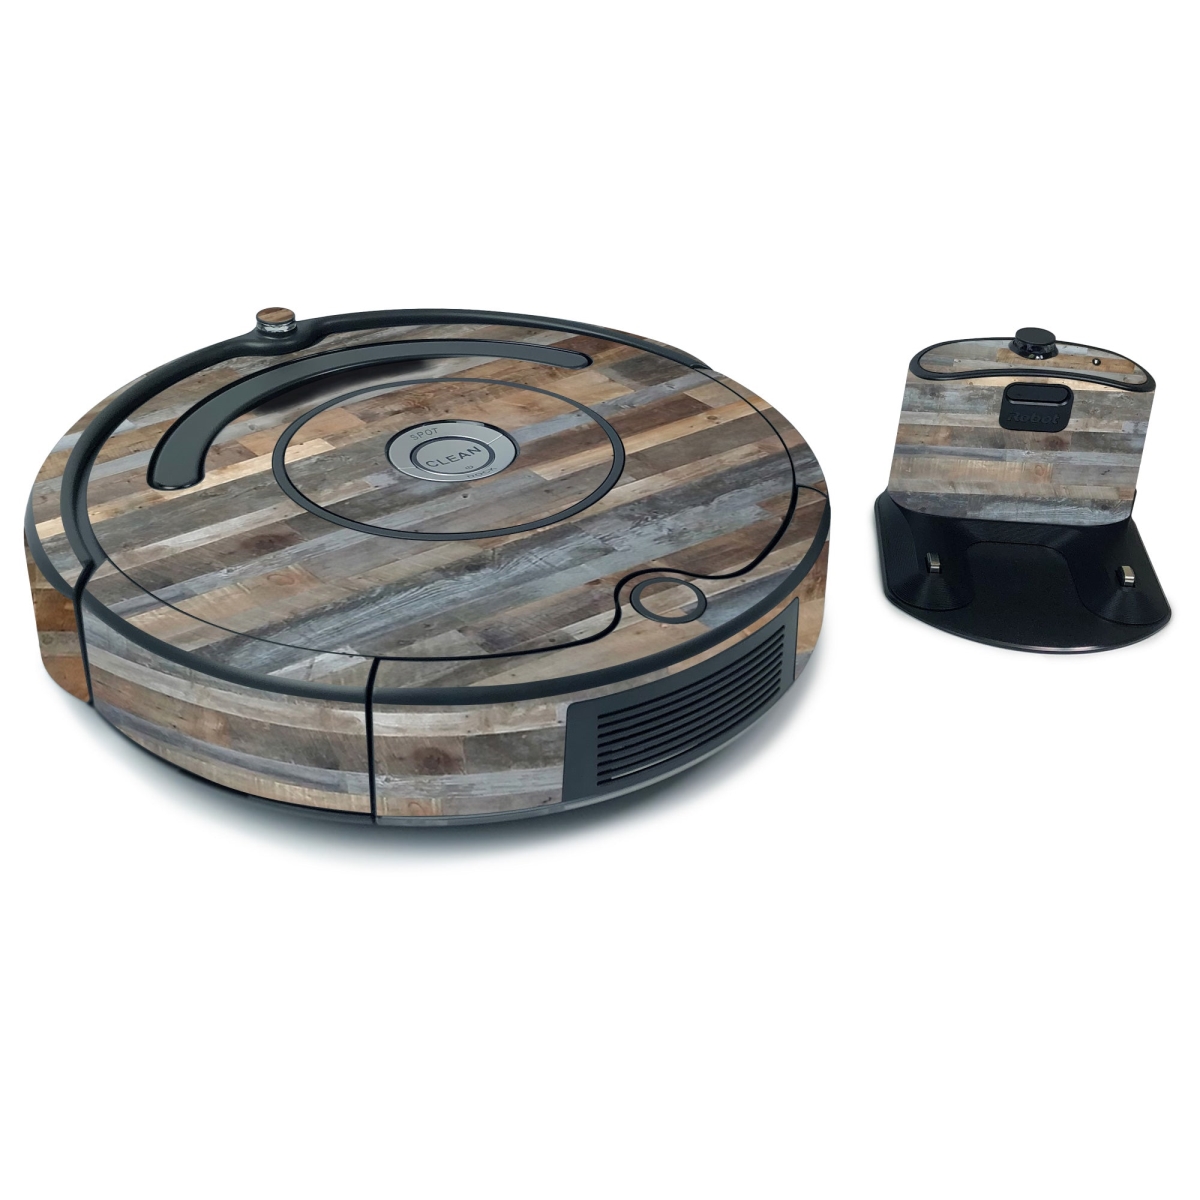 Picture of MightySkins IRRO675-Gray Wood Skin for iRobot Roomba 675 Max Coverage - Gray Wood